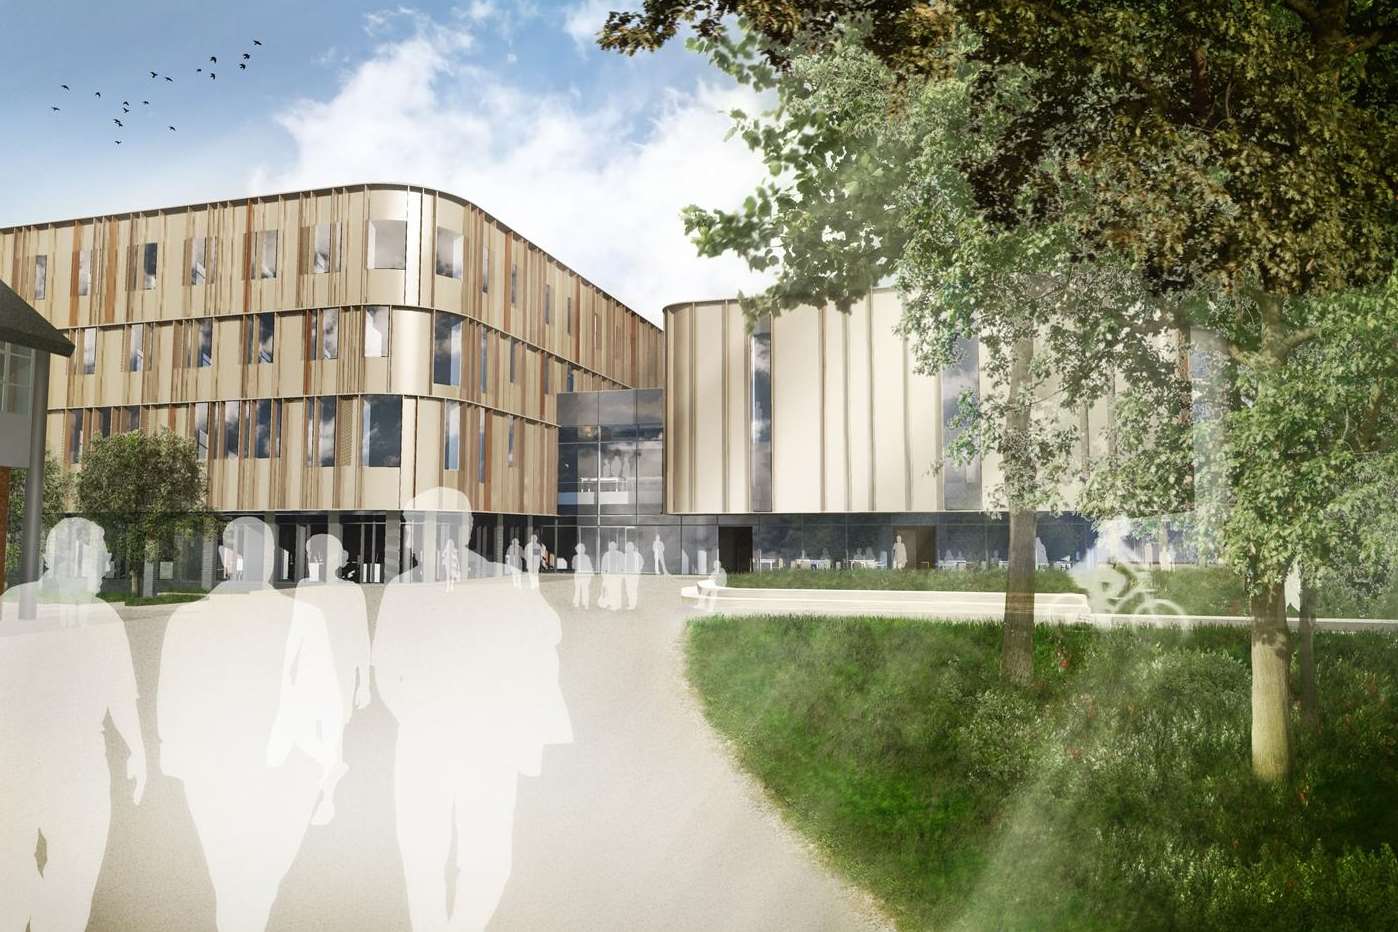 The new £29m building that will bring together Kent Business School and the University of Kent's school of mathematics